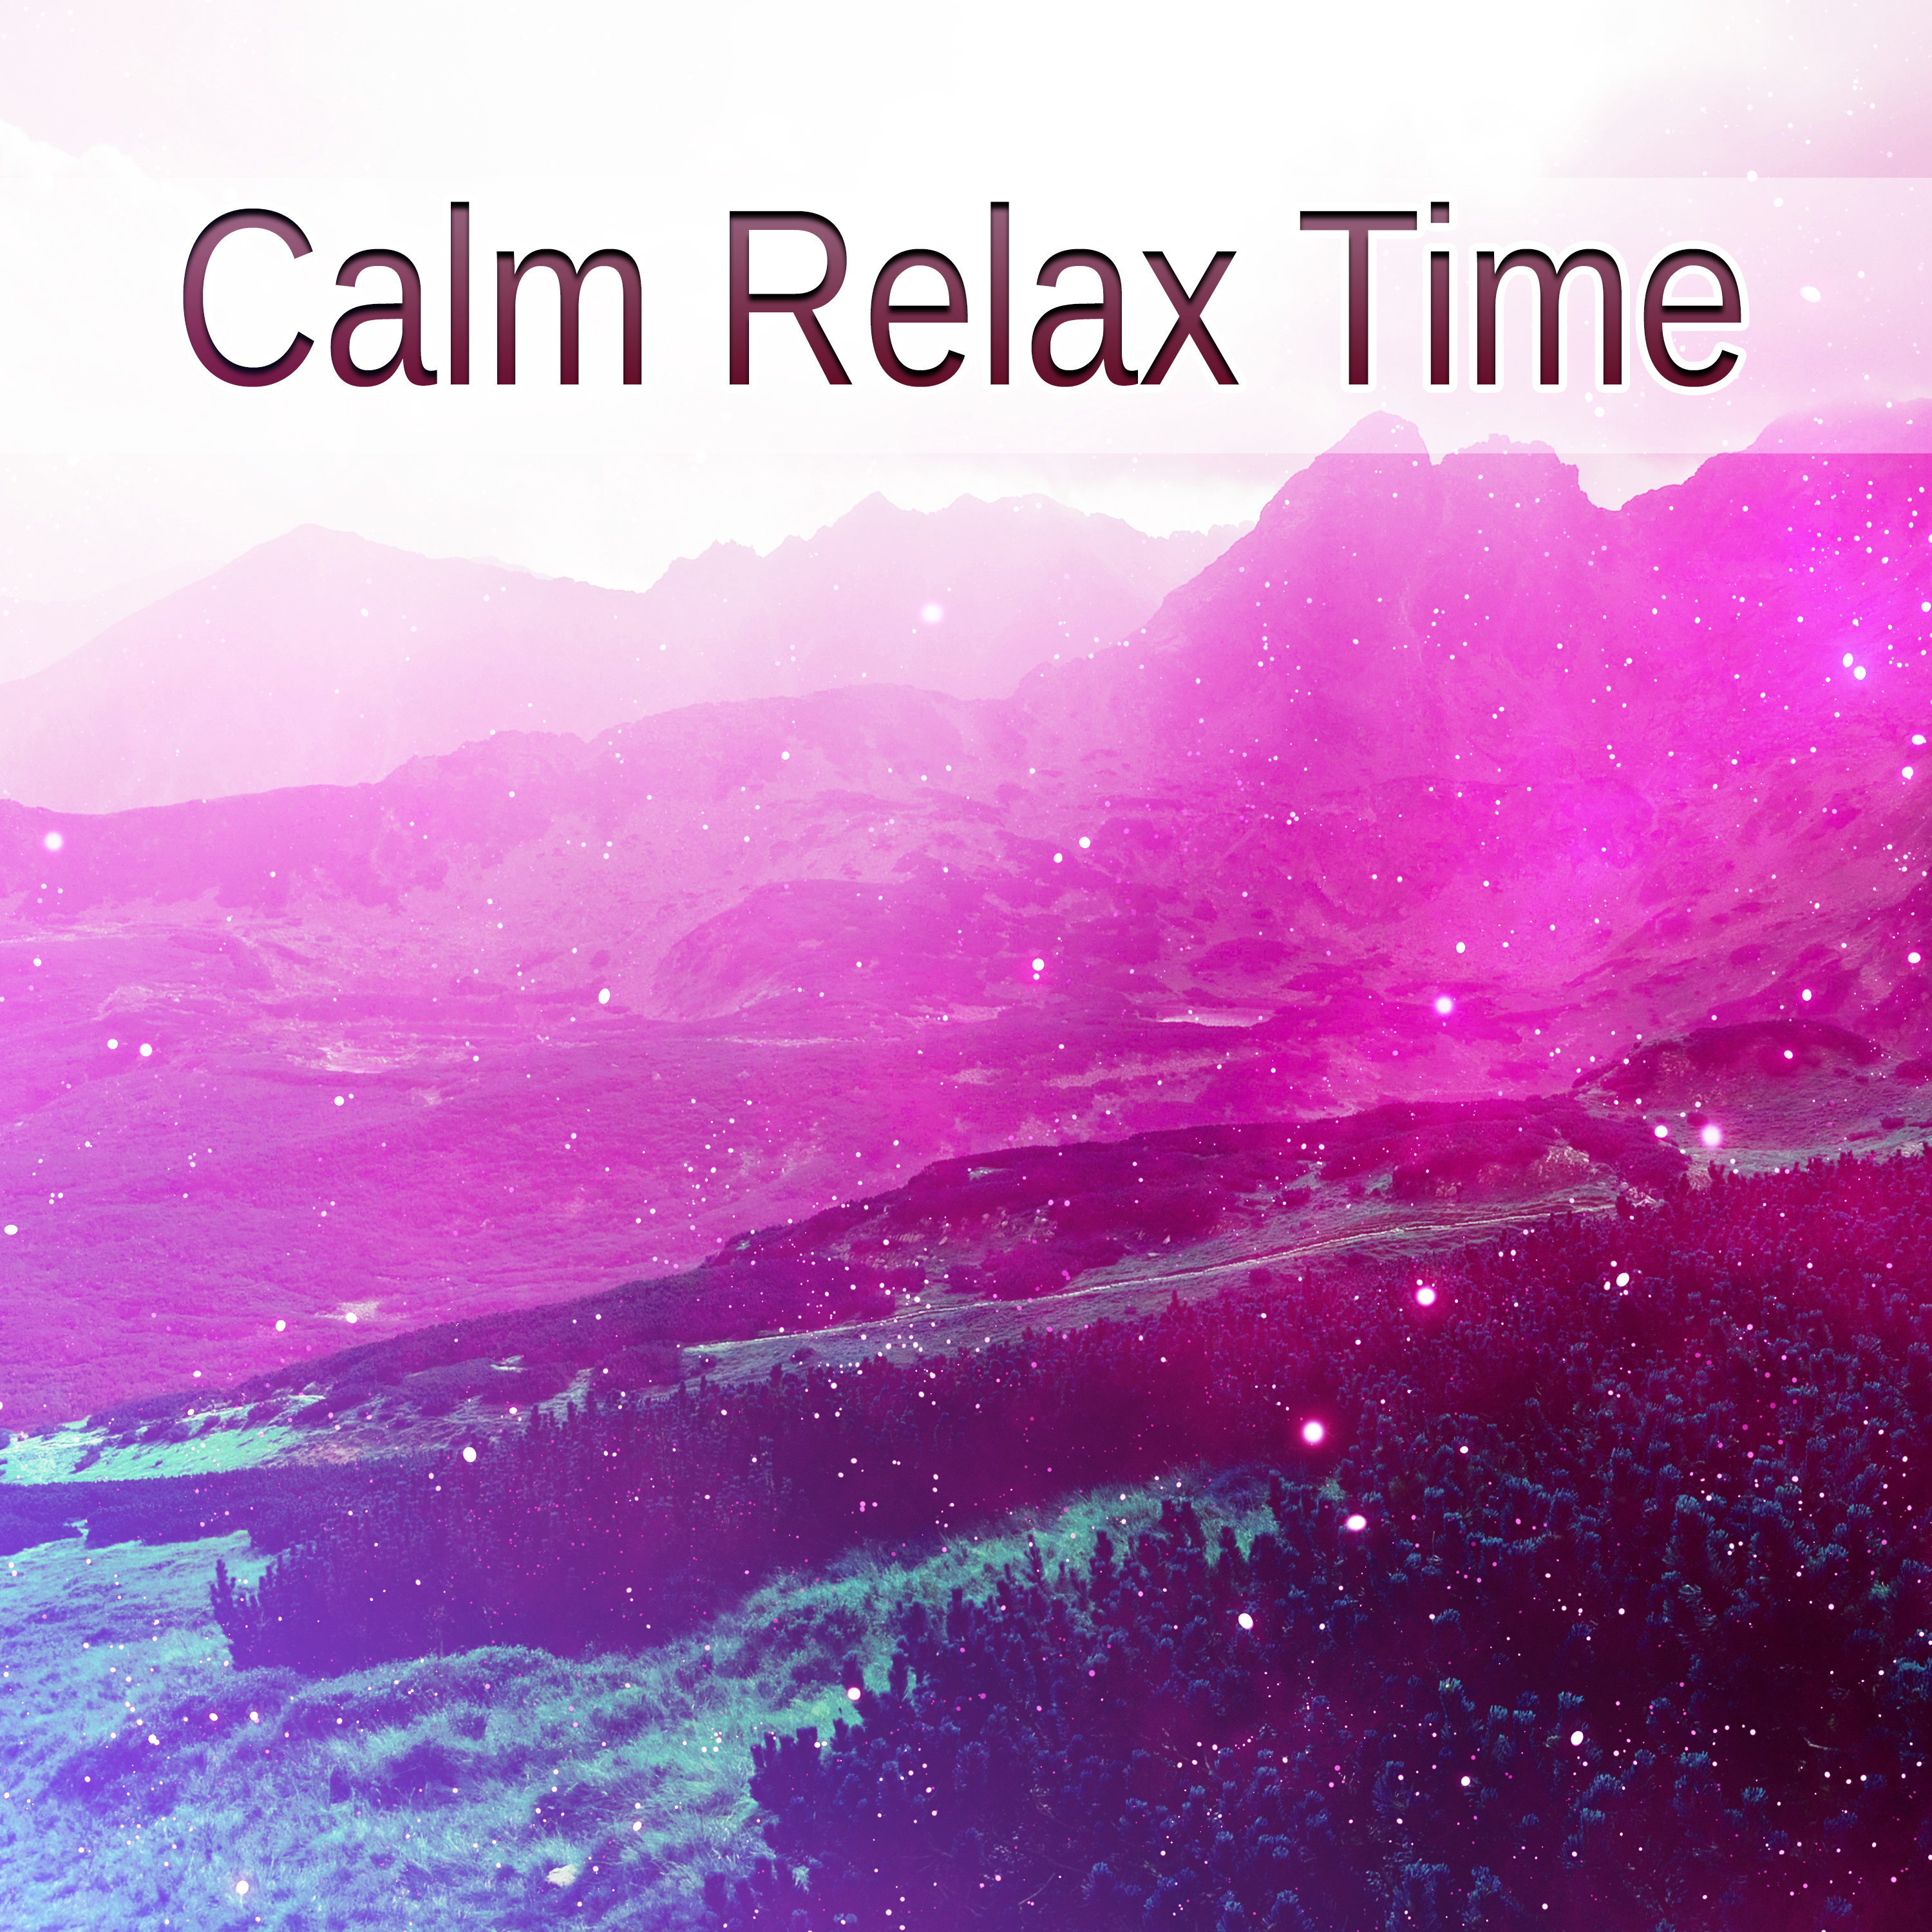 Calm Relax Time – Relaxing Music, Soft Sounds of Nature, New Age Music, Relax, Rest, Stress Relief & Reduce Anxiety